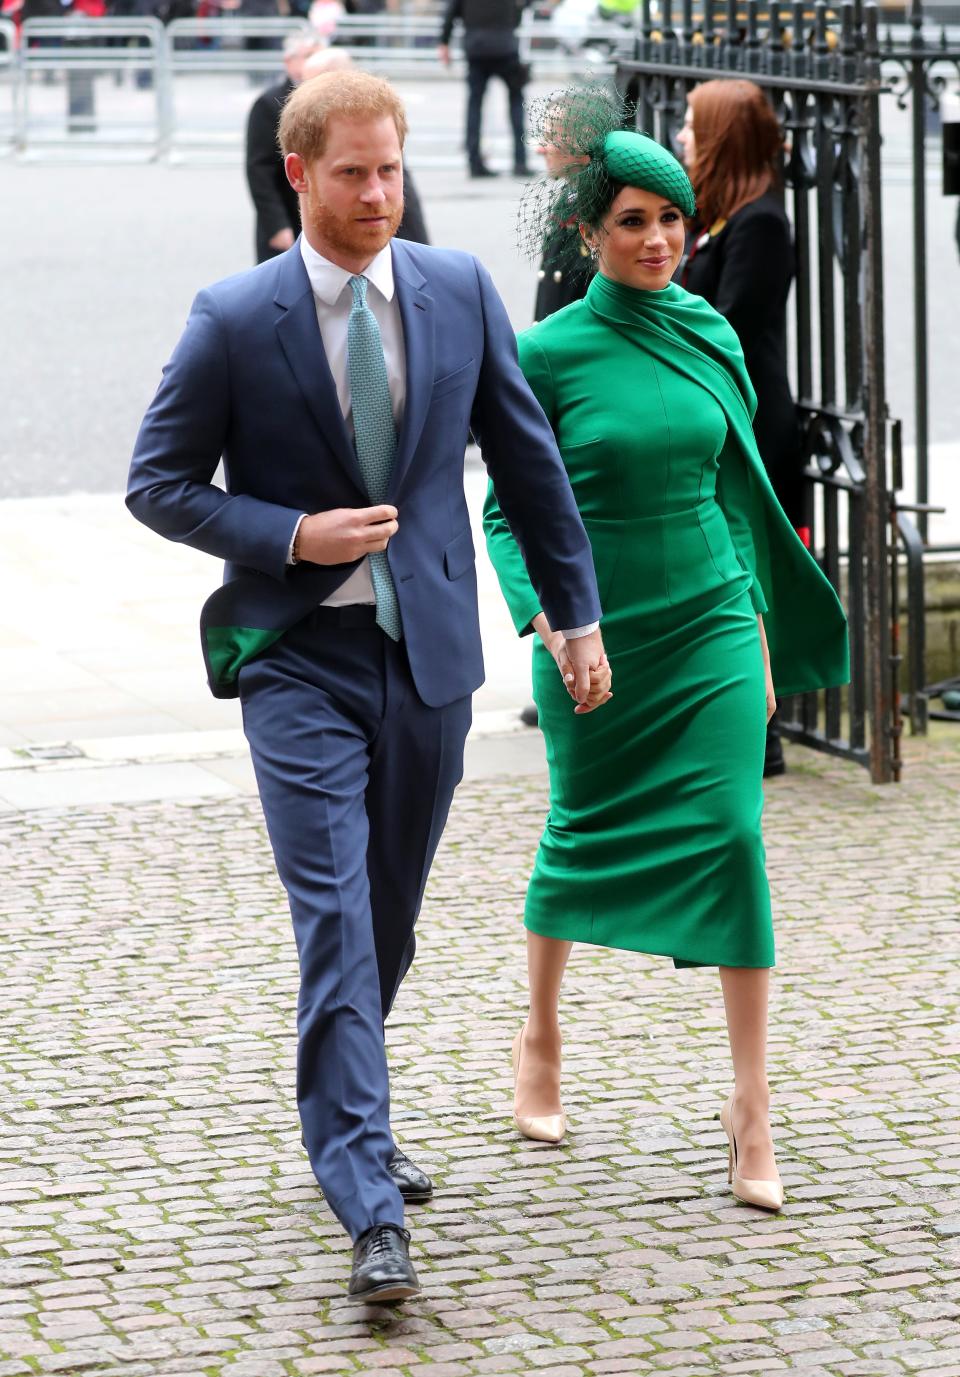 Prince Harry and Duchess Meghan of Sussex arrive at Westminster Abbey on March 9, 2020, for the annual Commonwealth Day service.